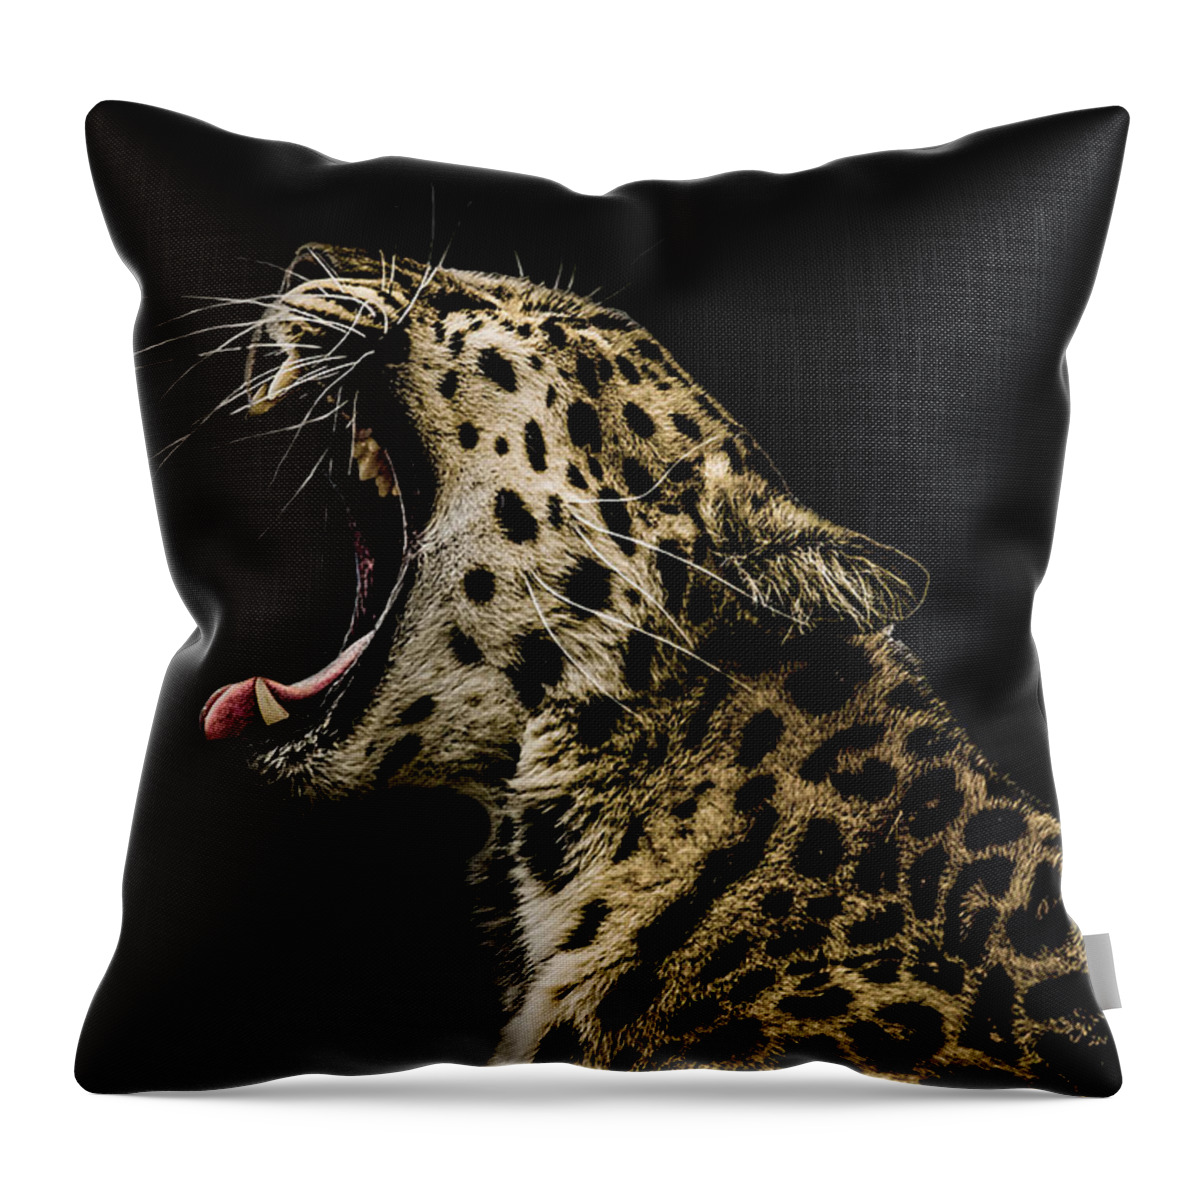 Leopard Throw Pillow featuring the photograph Jaded by Paul Neville